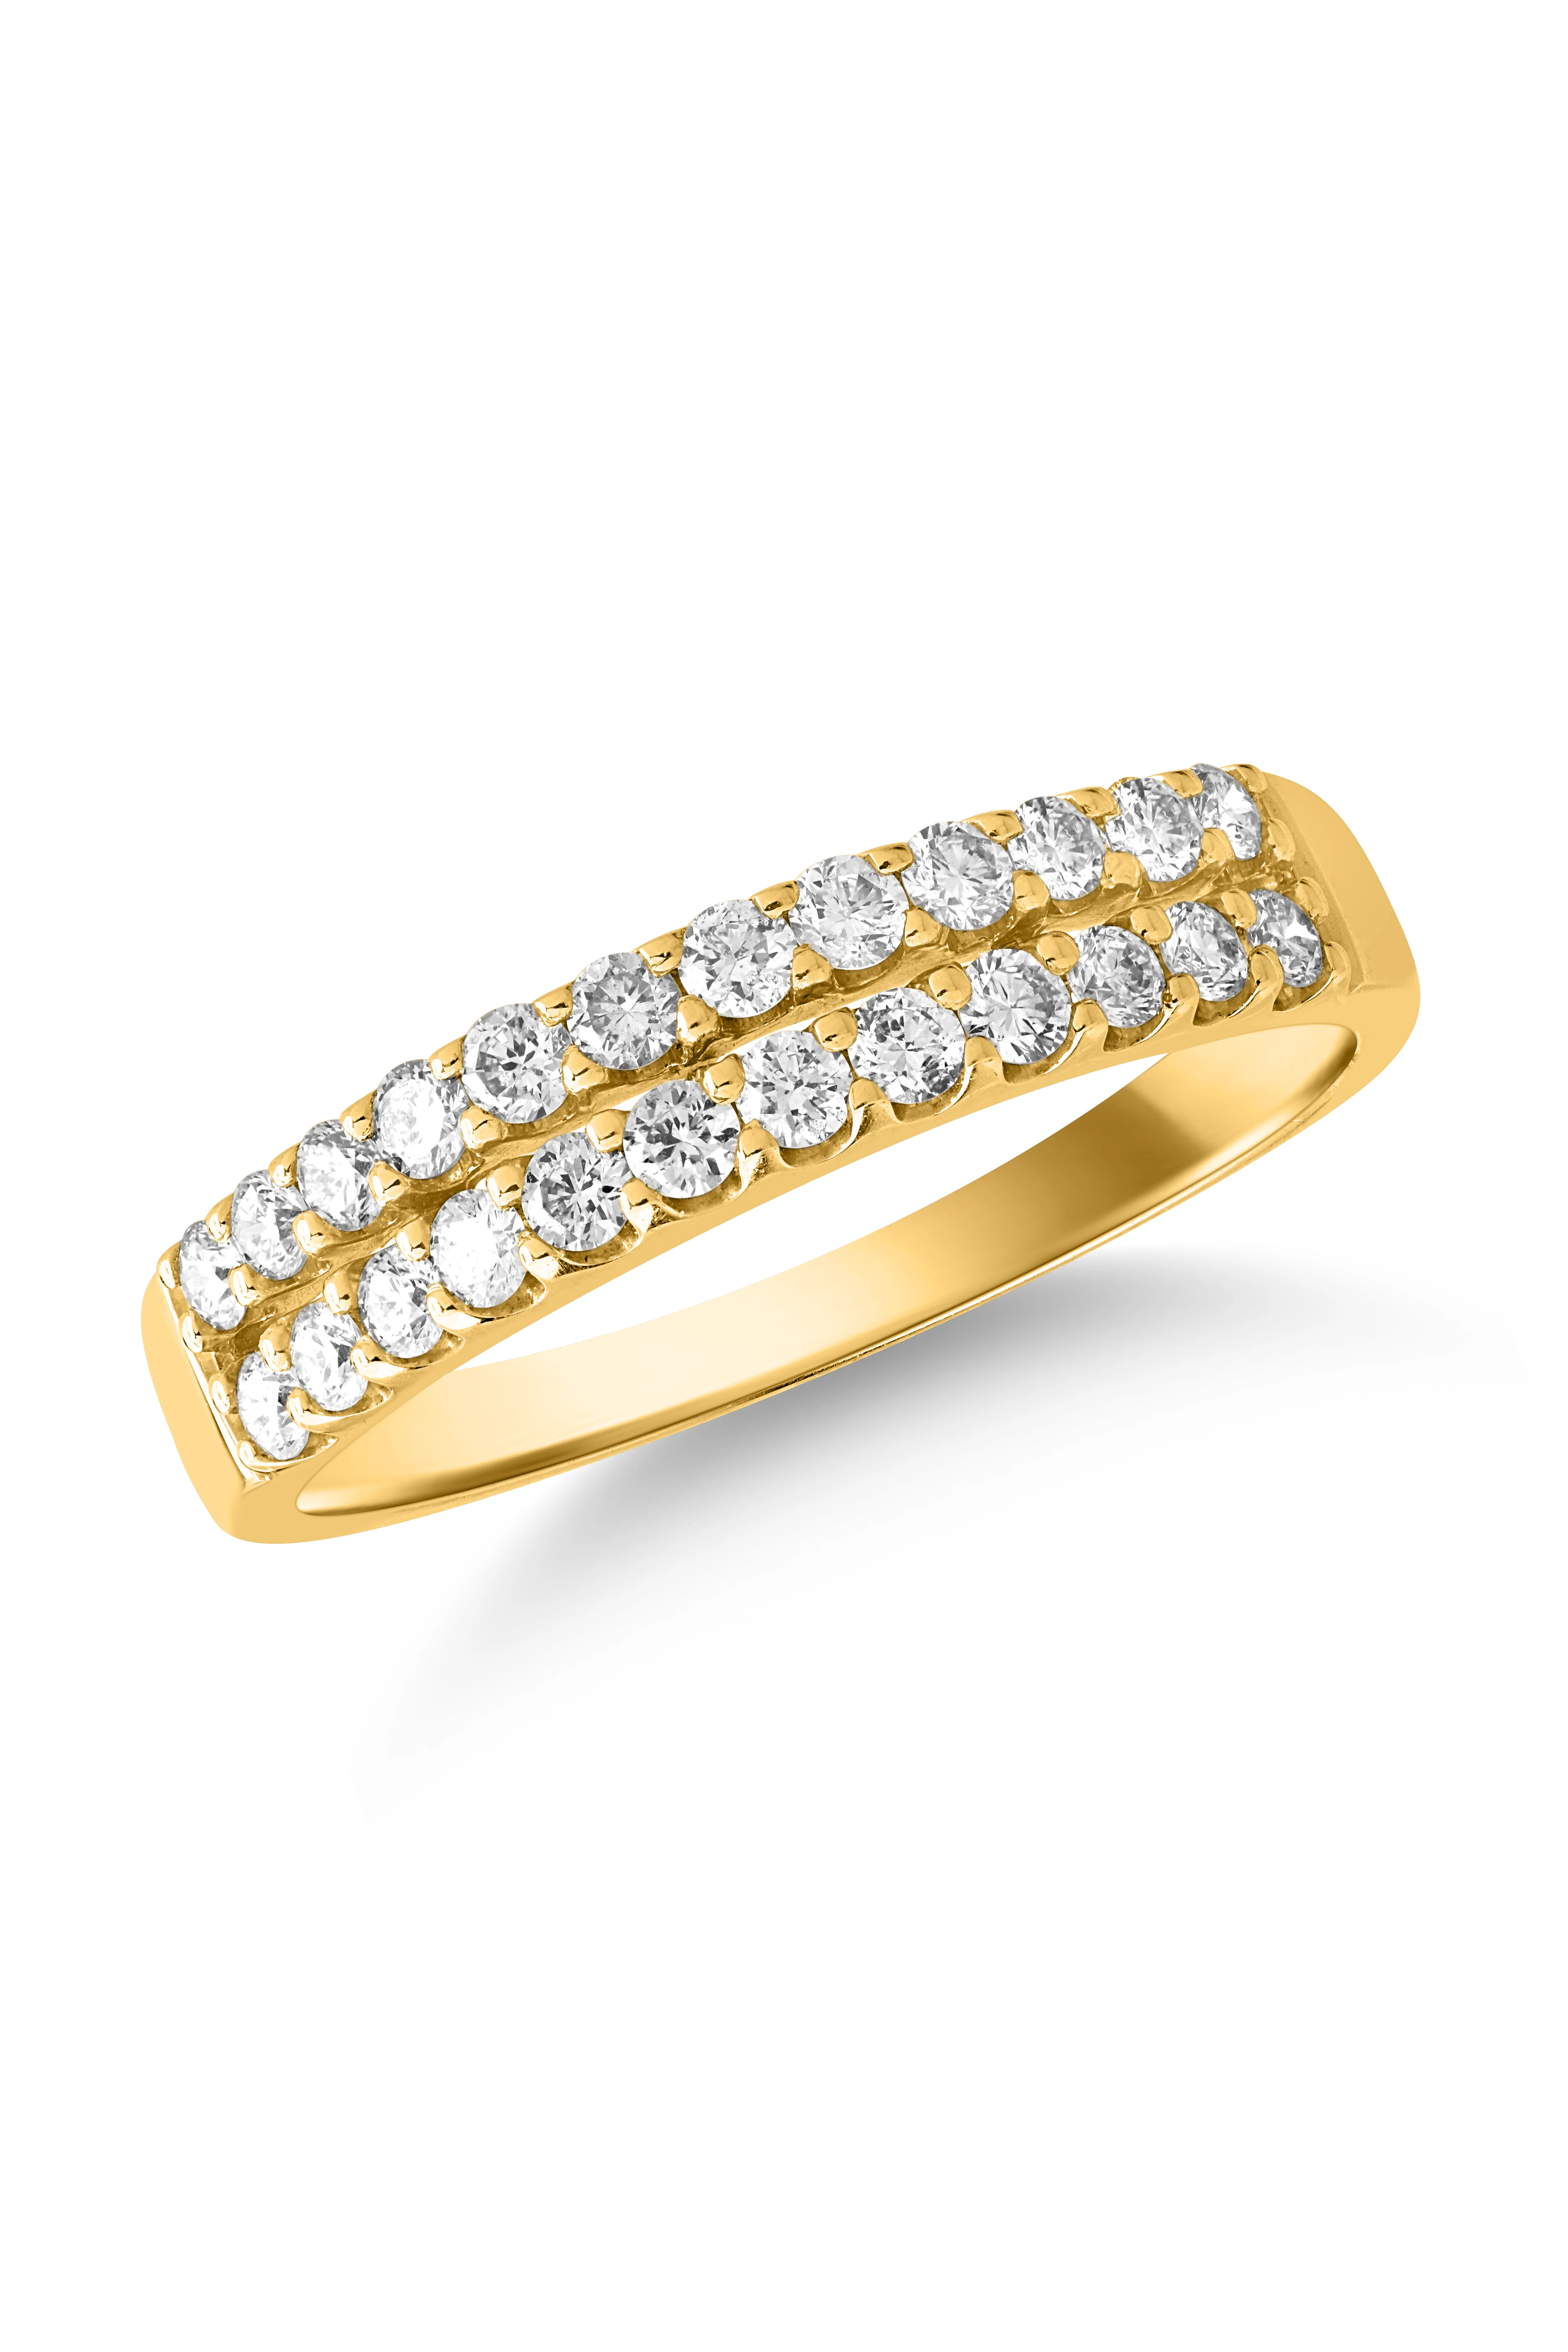 14K yellow gold ring with 0.504ct diamonds